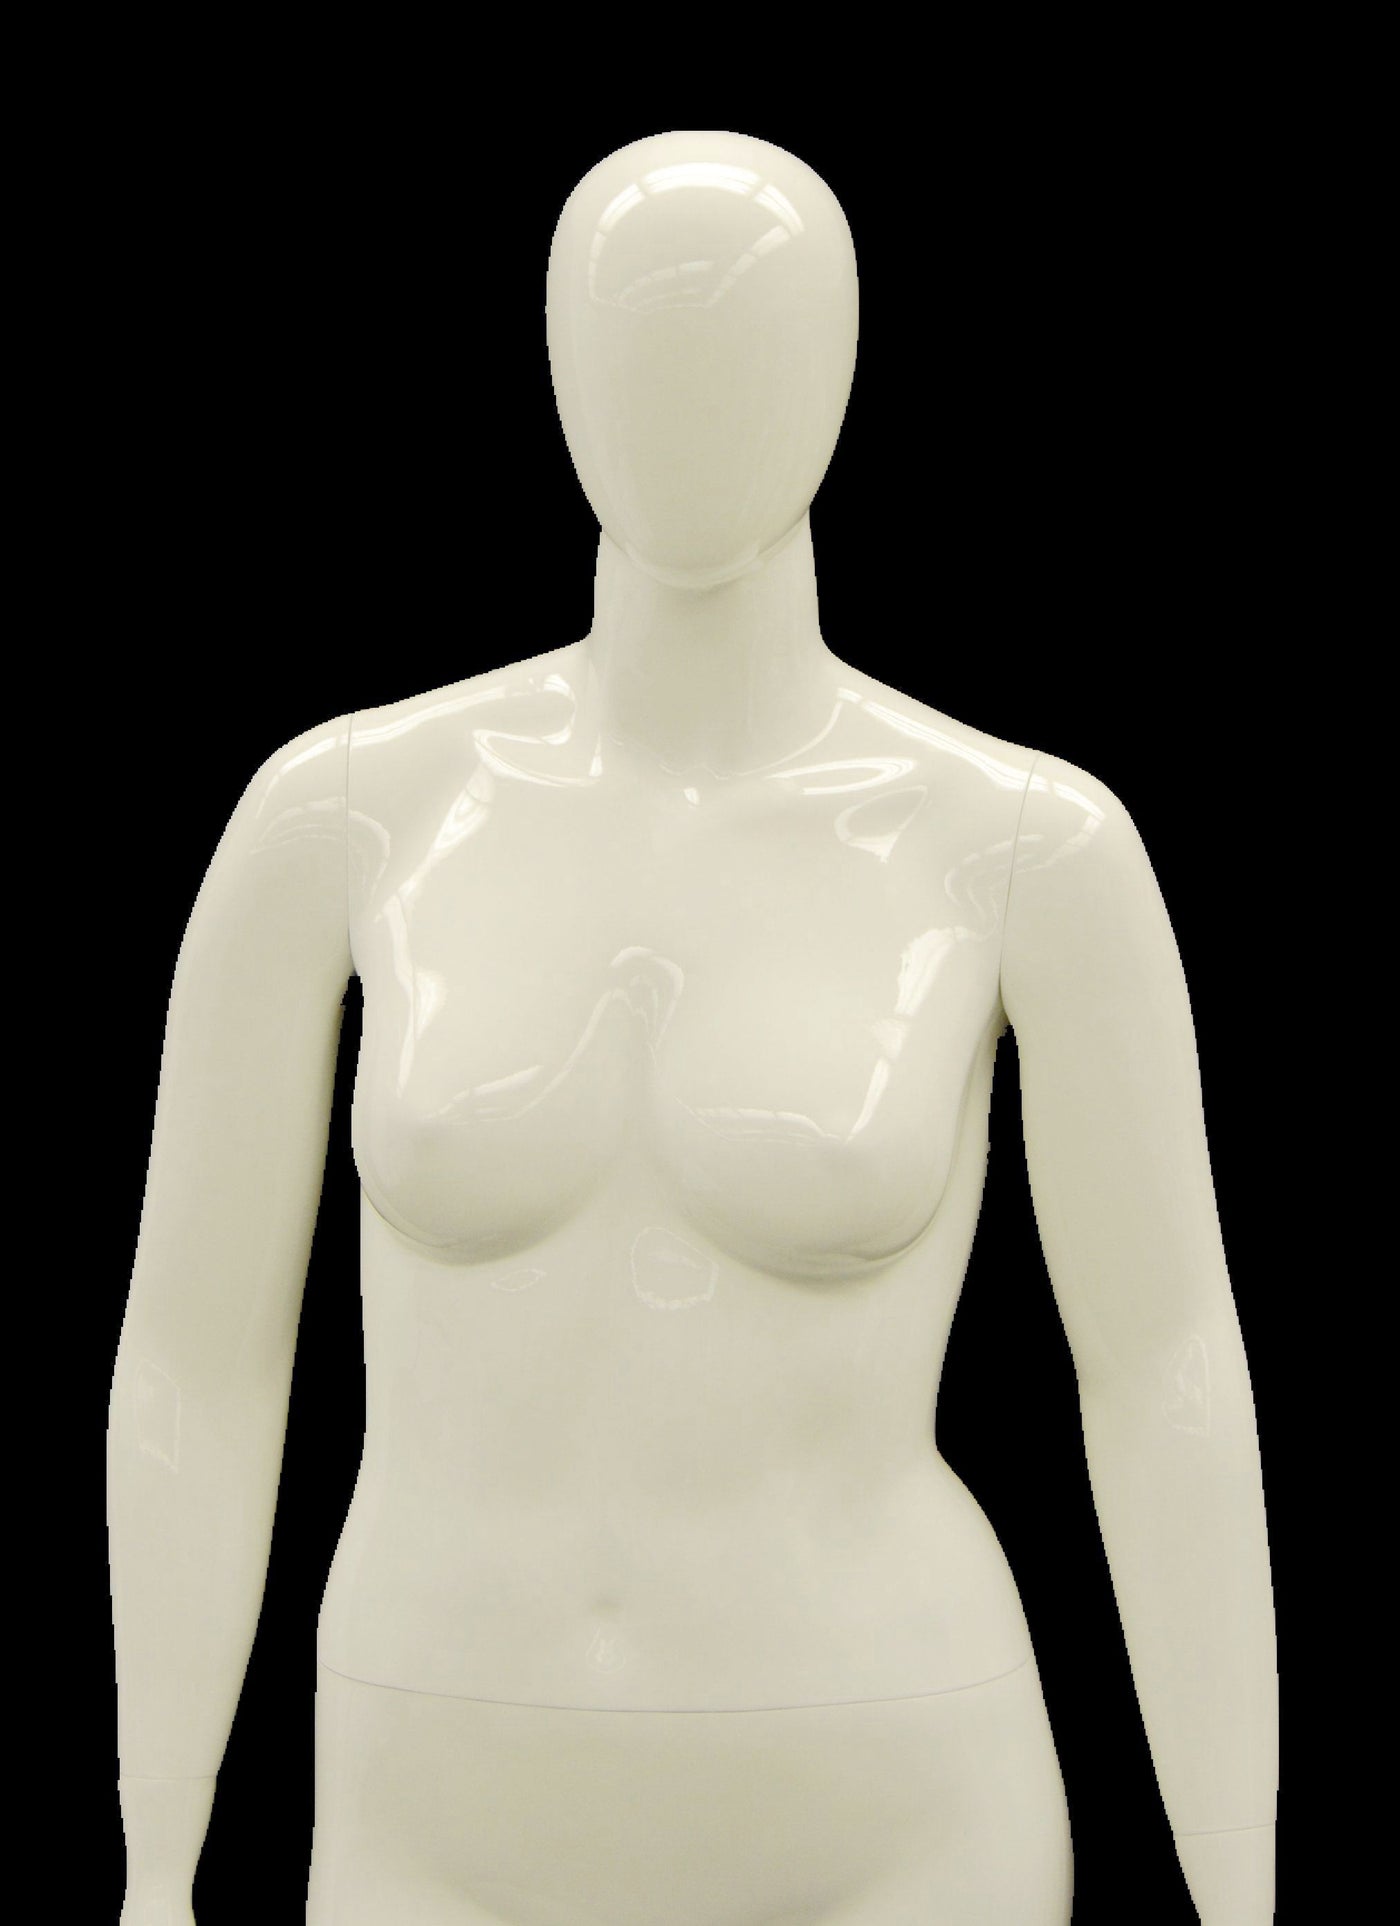 Lizzy: Plus Size Headless Female Mannequin in Glossy White